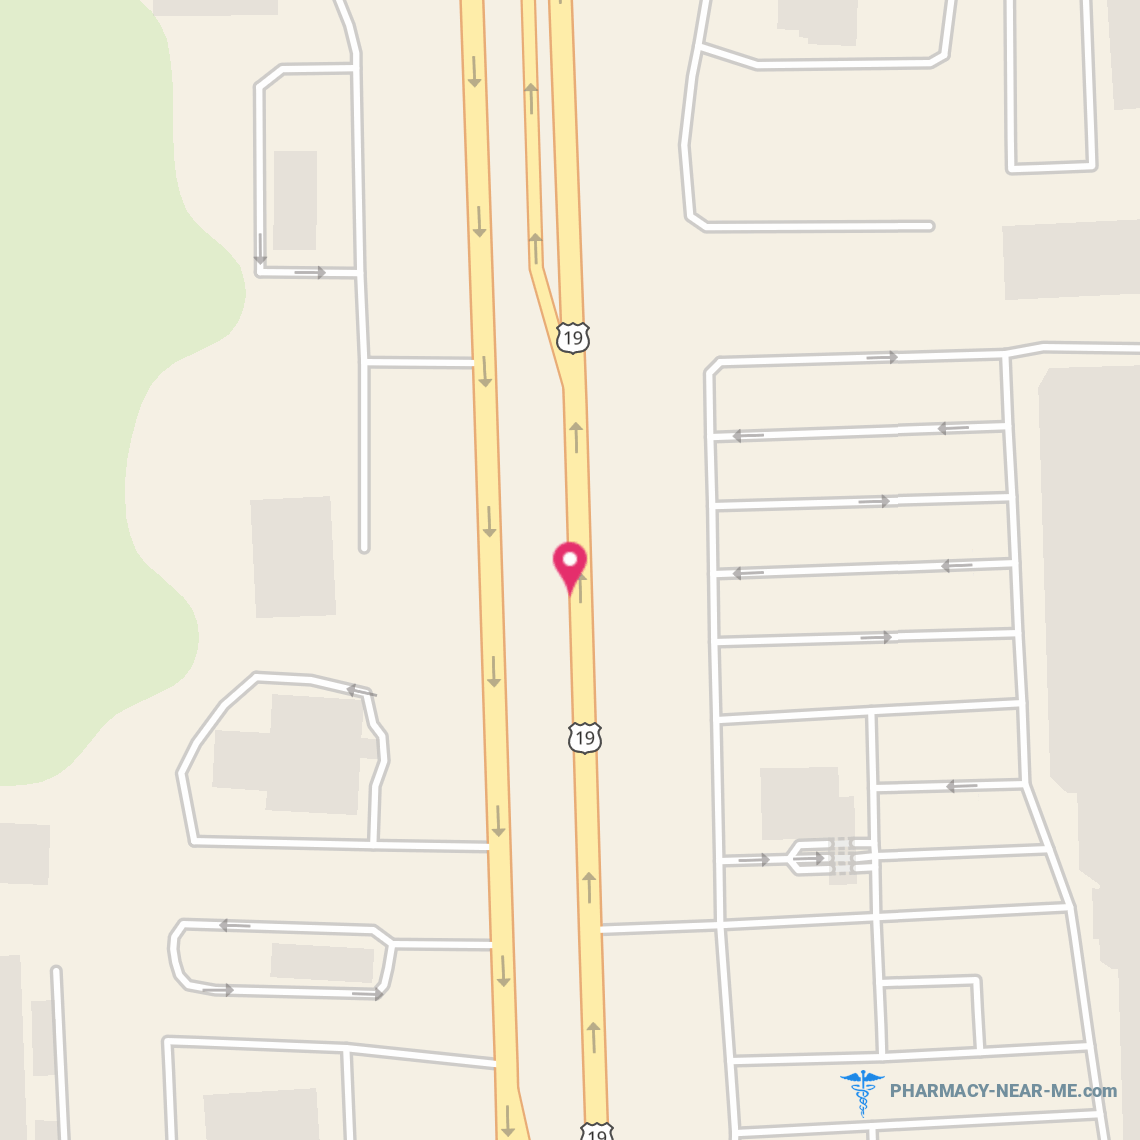 PUBLIX PHARMACY #0415 - Pharmacy Hours, Phone, Reviews & Information: 33343 US Highway 19 North, Palm Harbor, Florida 34684, United States